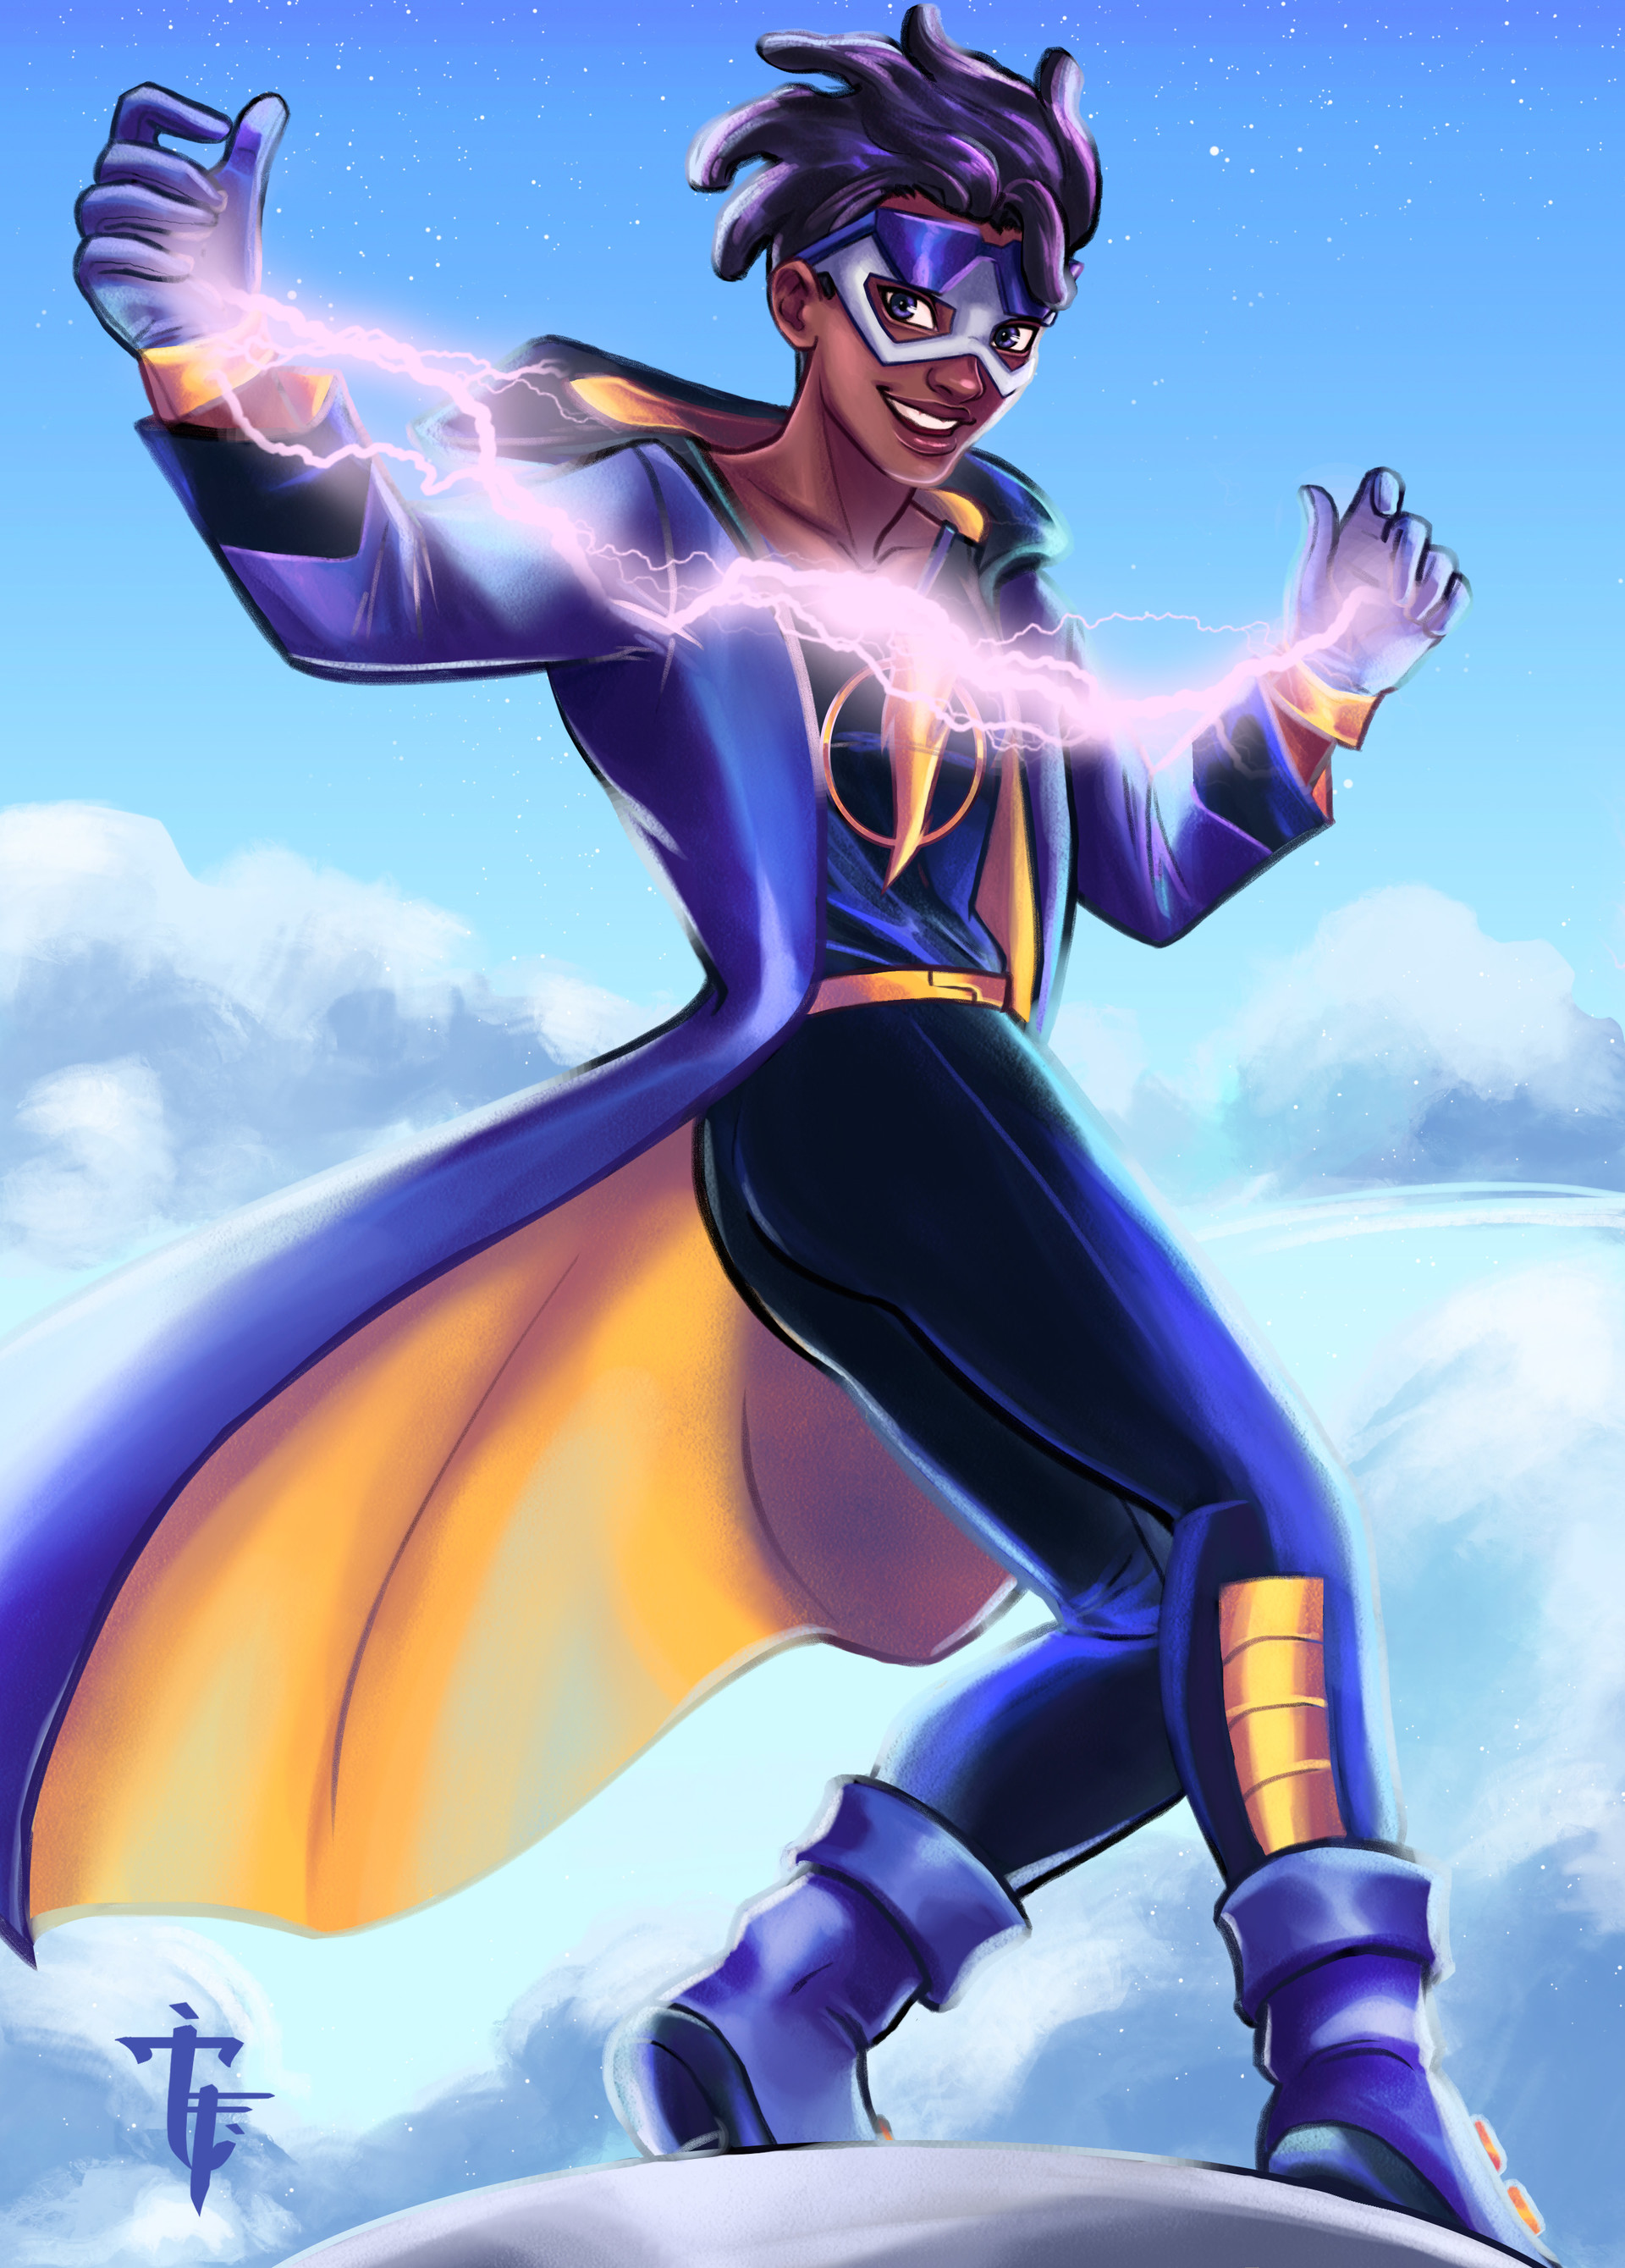 A little tribute I've made for Static Shock, a show that I really love...